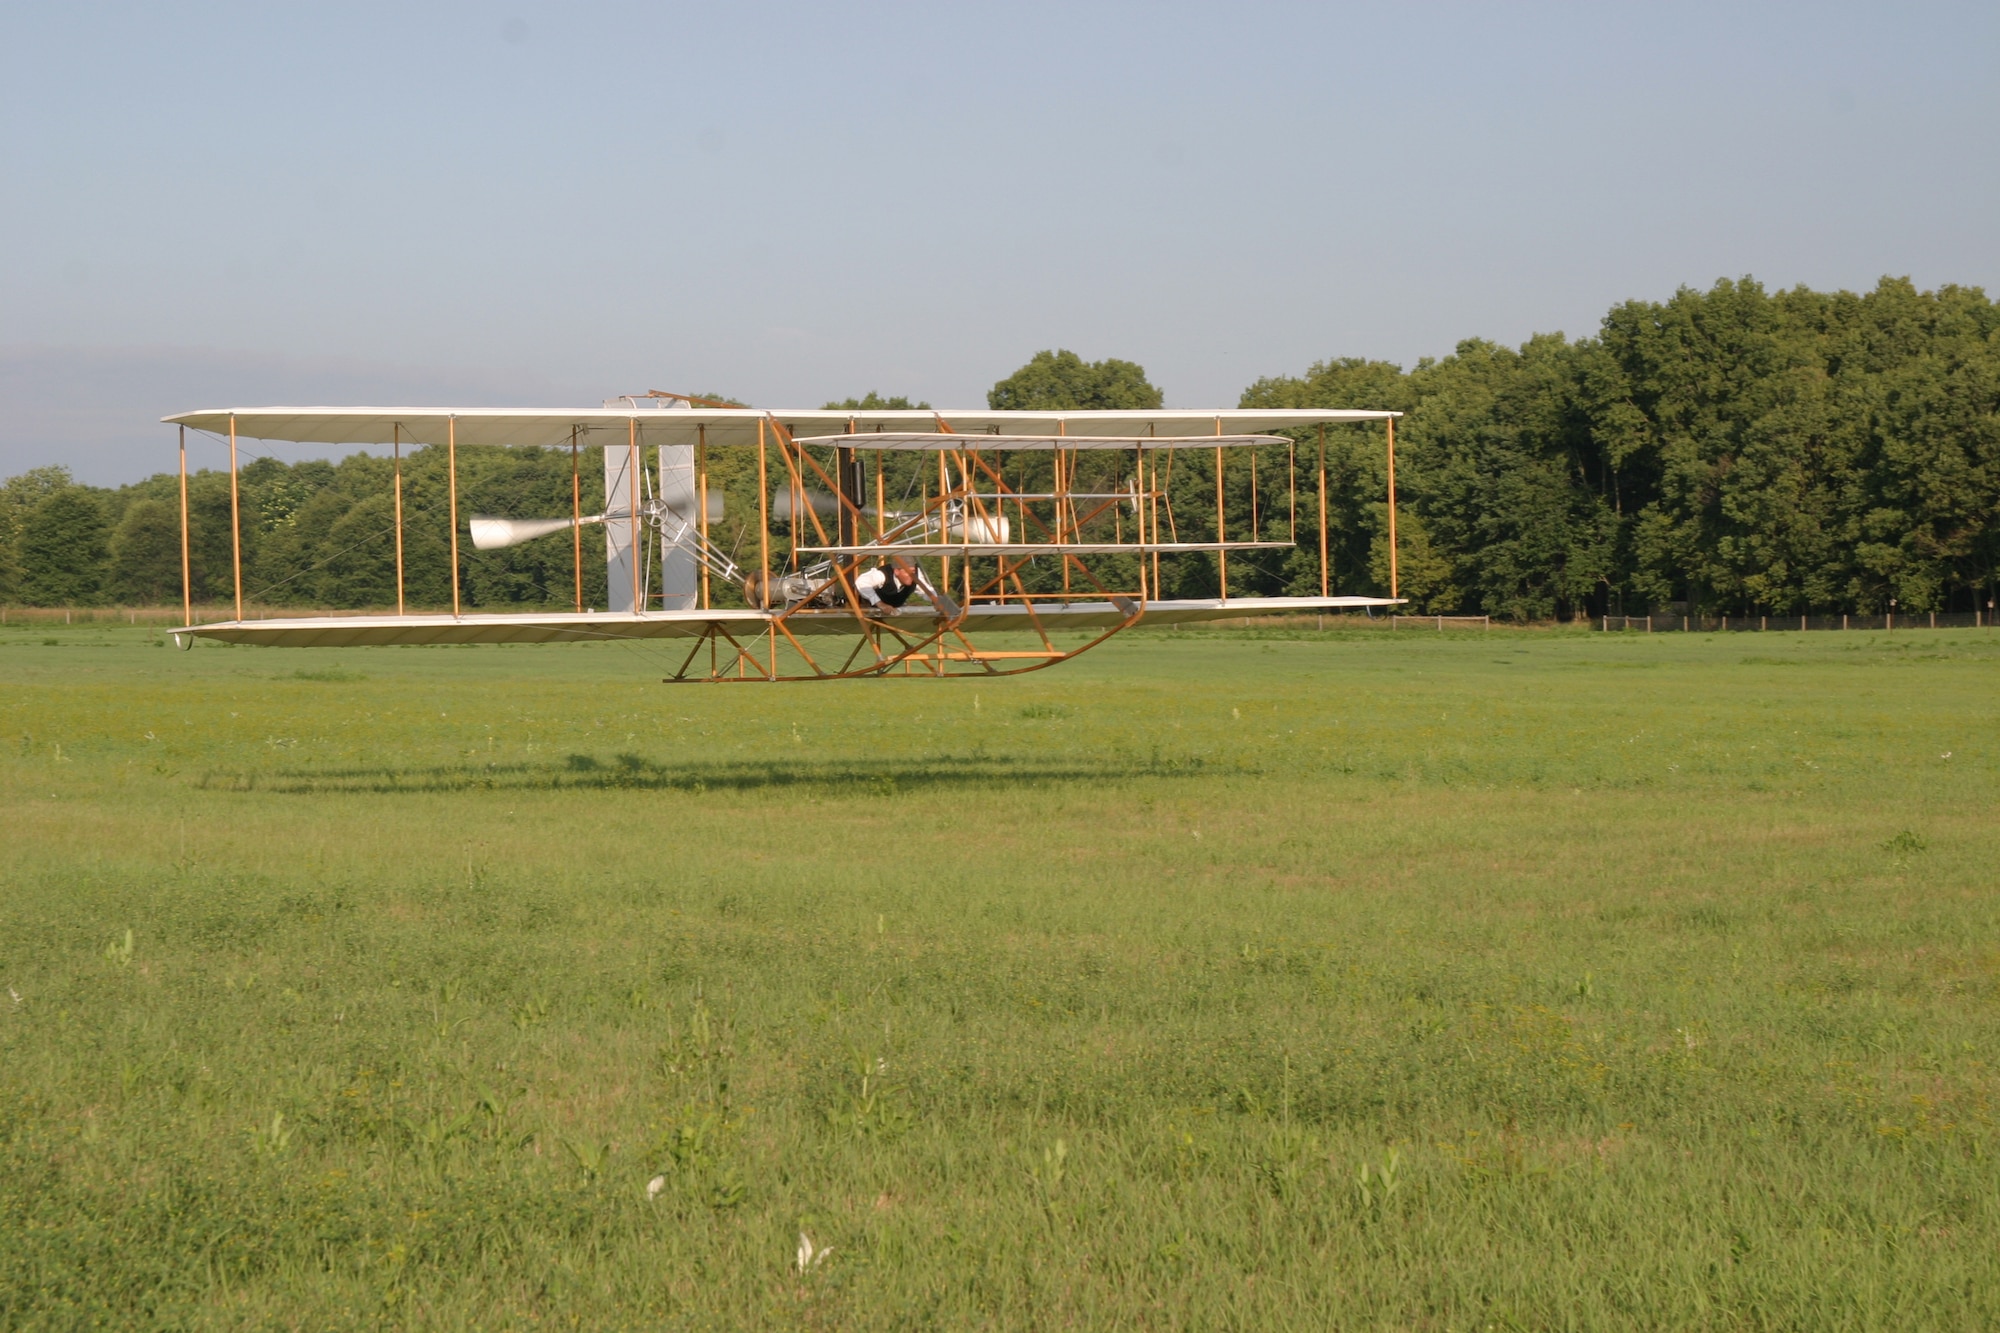 Vintage aircraft builder Mark Dusenberry pilots a replica Wright Flyer III at Huffman Prairie Flying Field.  Dusenberry will reenact the first practical circling flight by a powered aircraft during a National Park Service and Aviation Heritage Foundation sponsored event at Wright-Patterson Air Force Base on Oct. 5. (National Park Service photo)